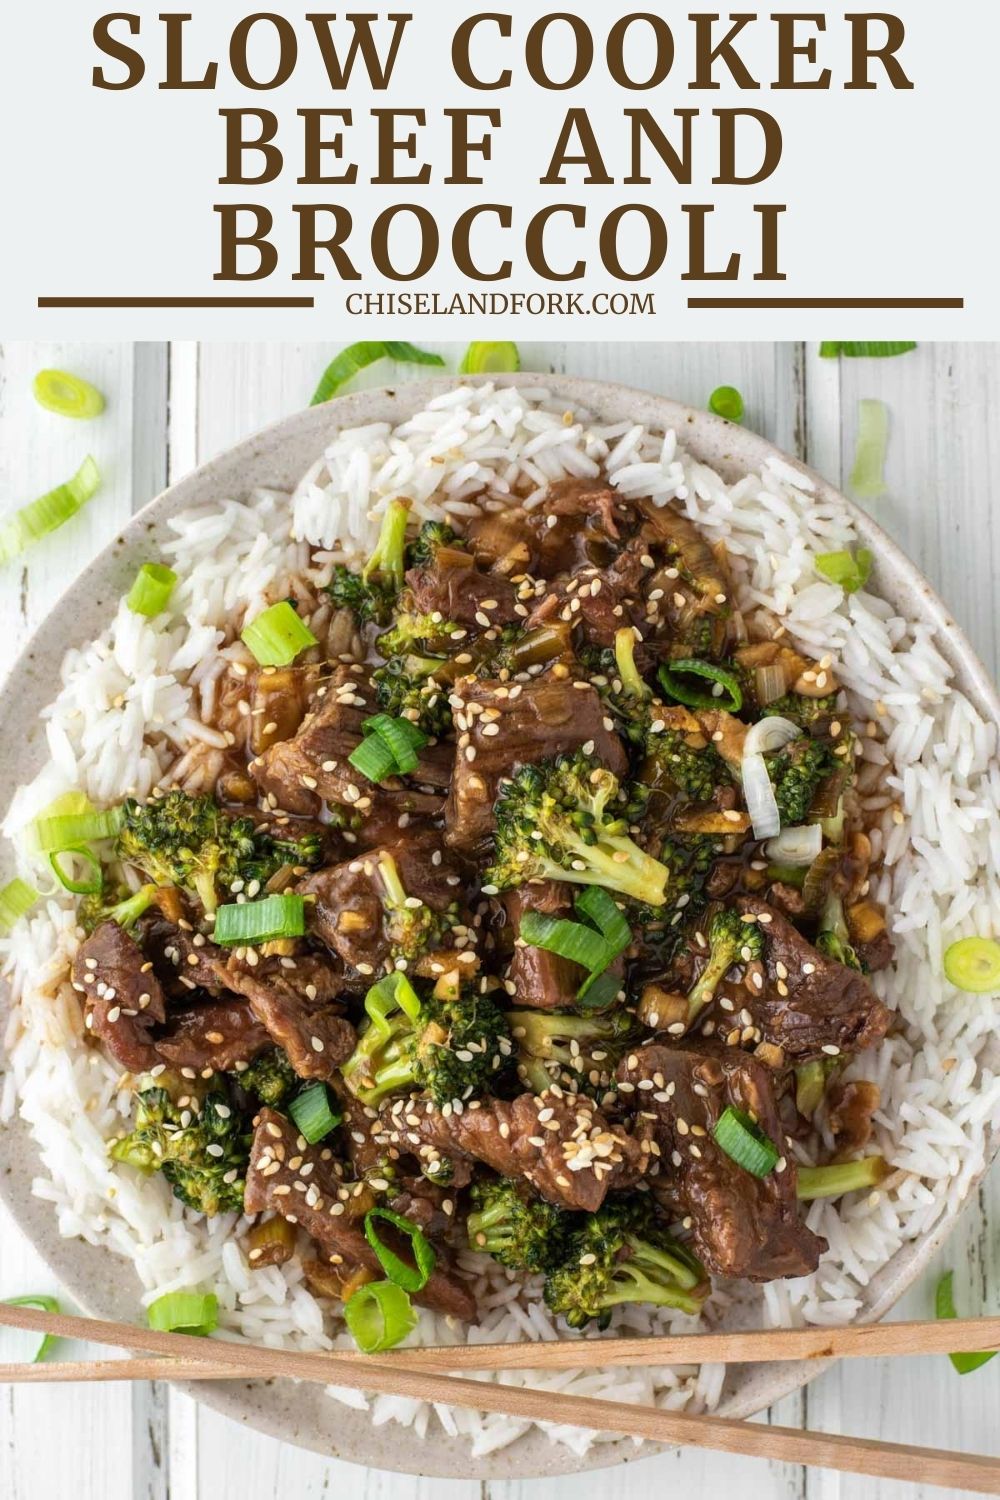 Slow Cooker Beef and Broccoli Recipe - Chisel & Fork